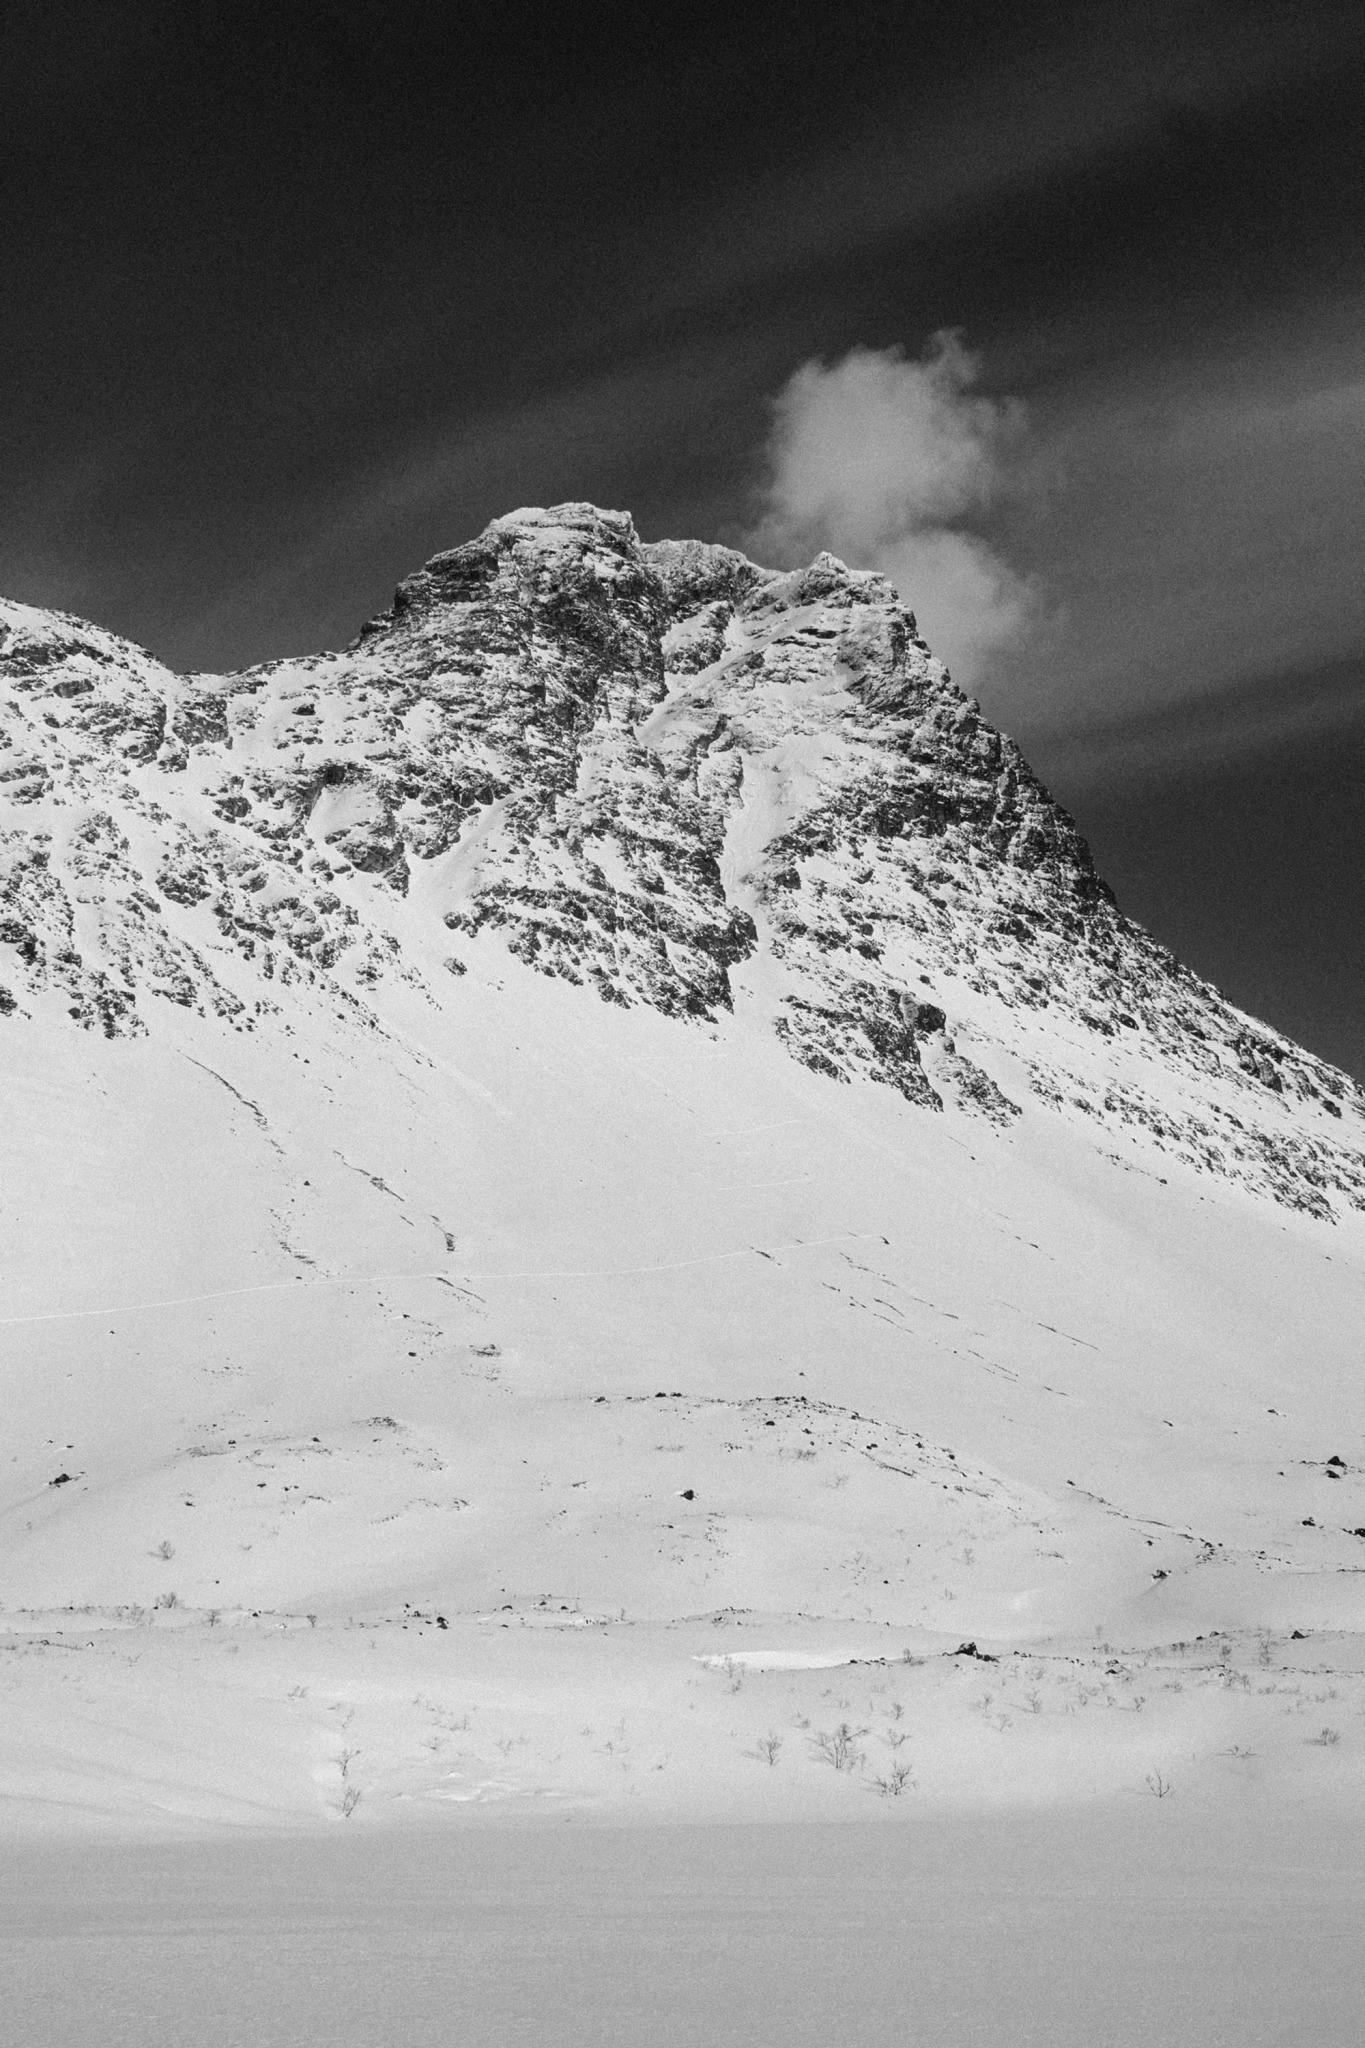 A black and white photo of a mountain